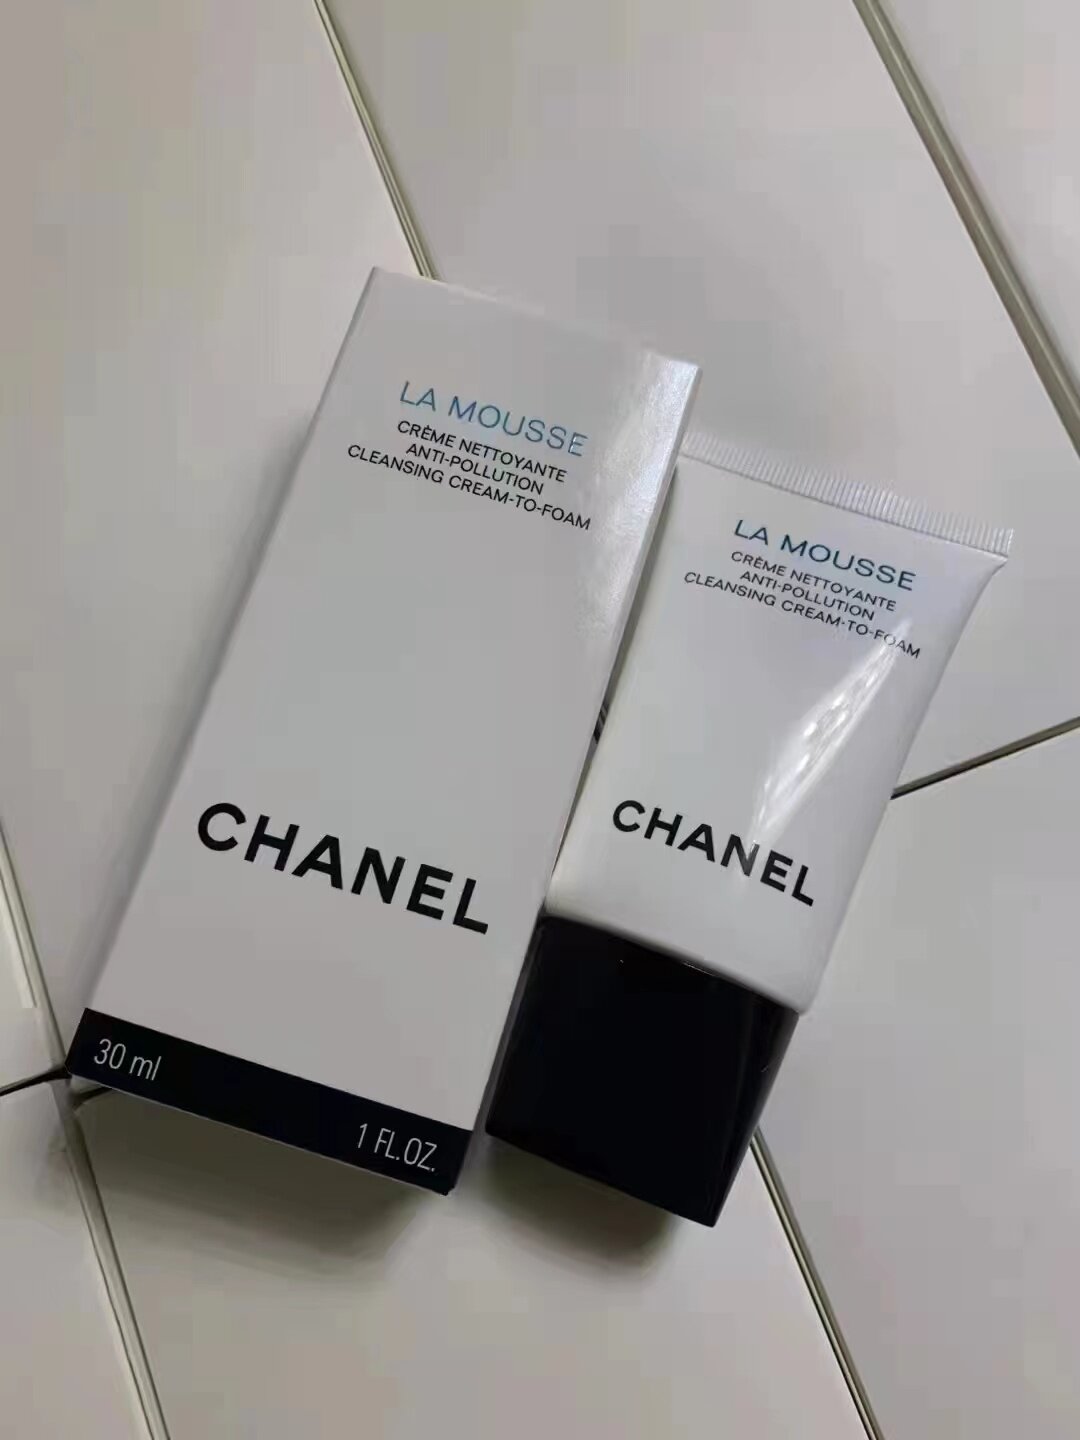 CHANEL LA MOUSSE Anti-Pollution Cleansing Cream to Foam 5 oz Cleanser New  FRESH